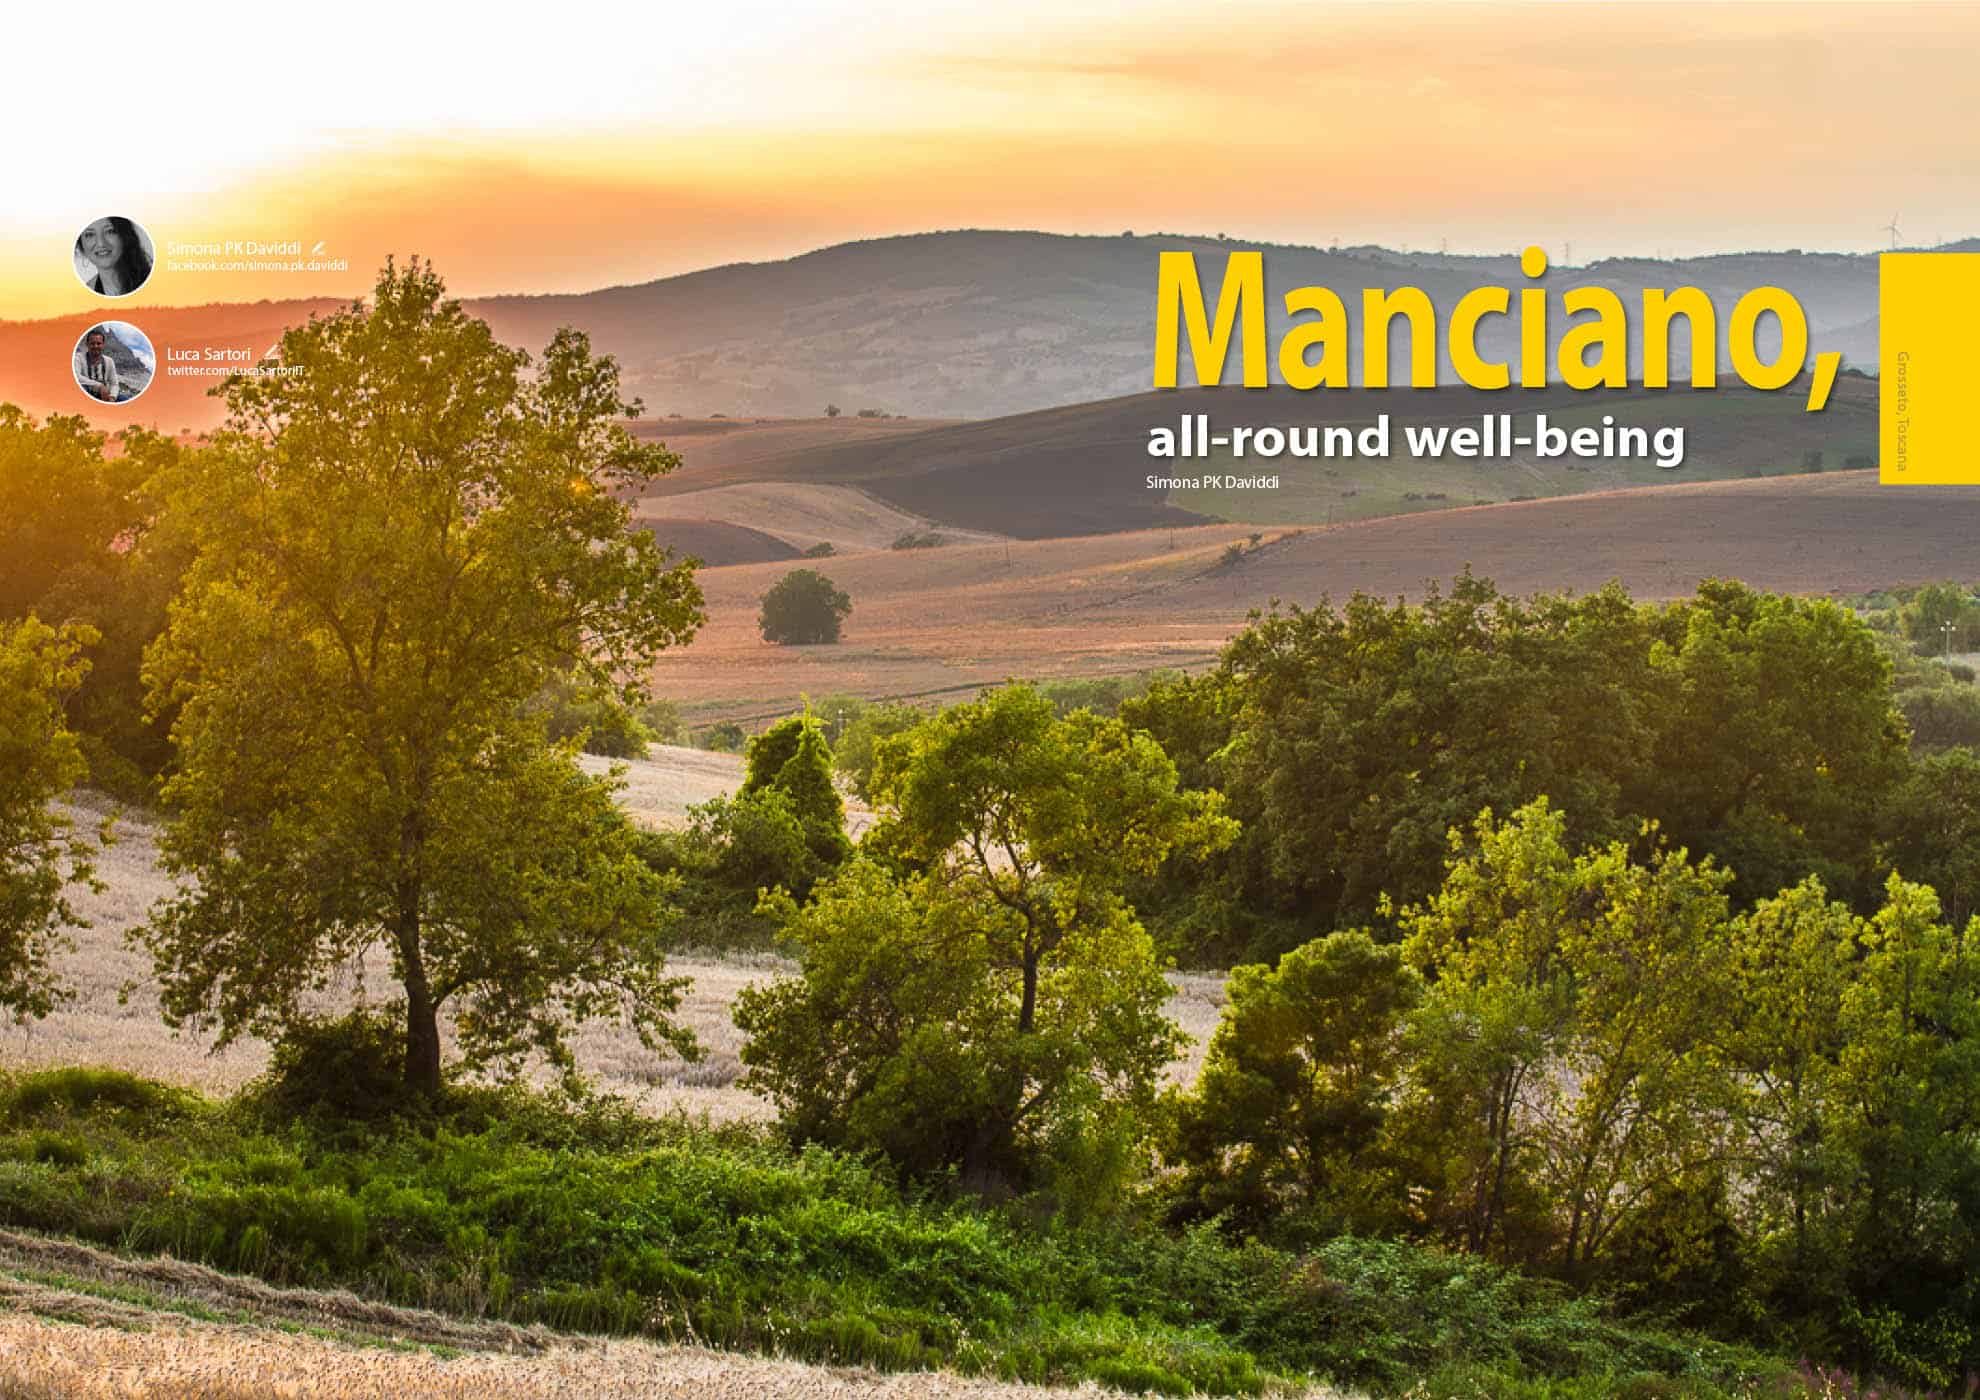 e-borghi travel 2: Well-being and villages - Manciano: all-round well-being